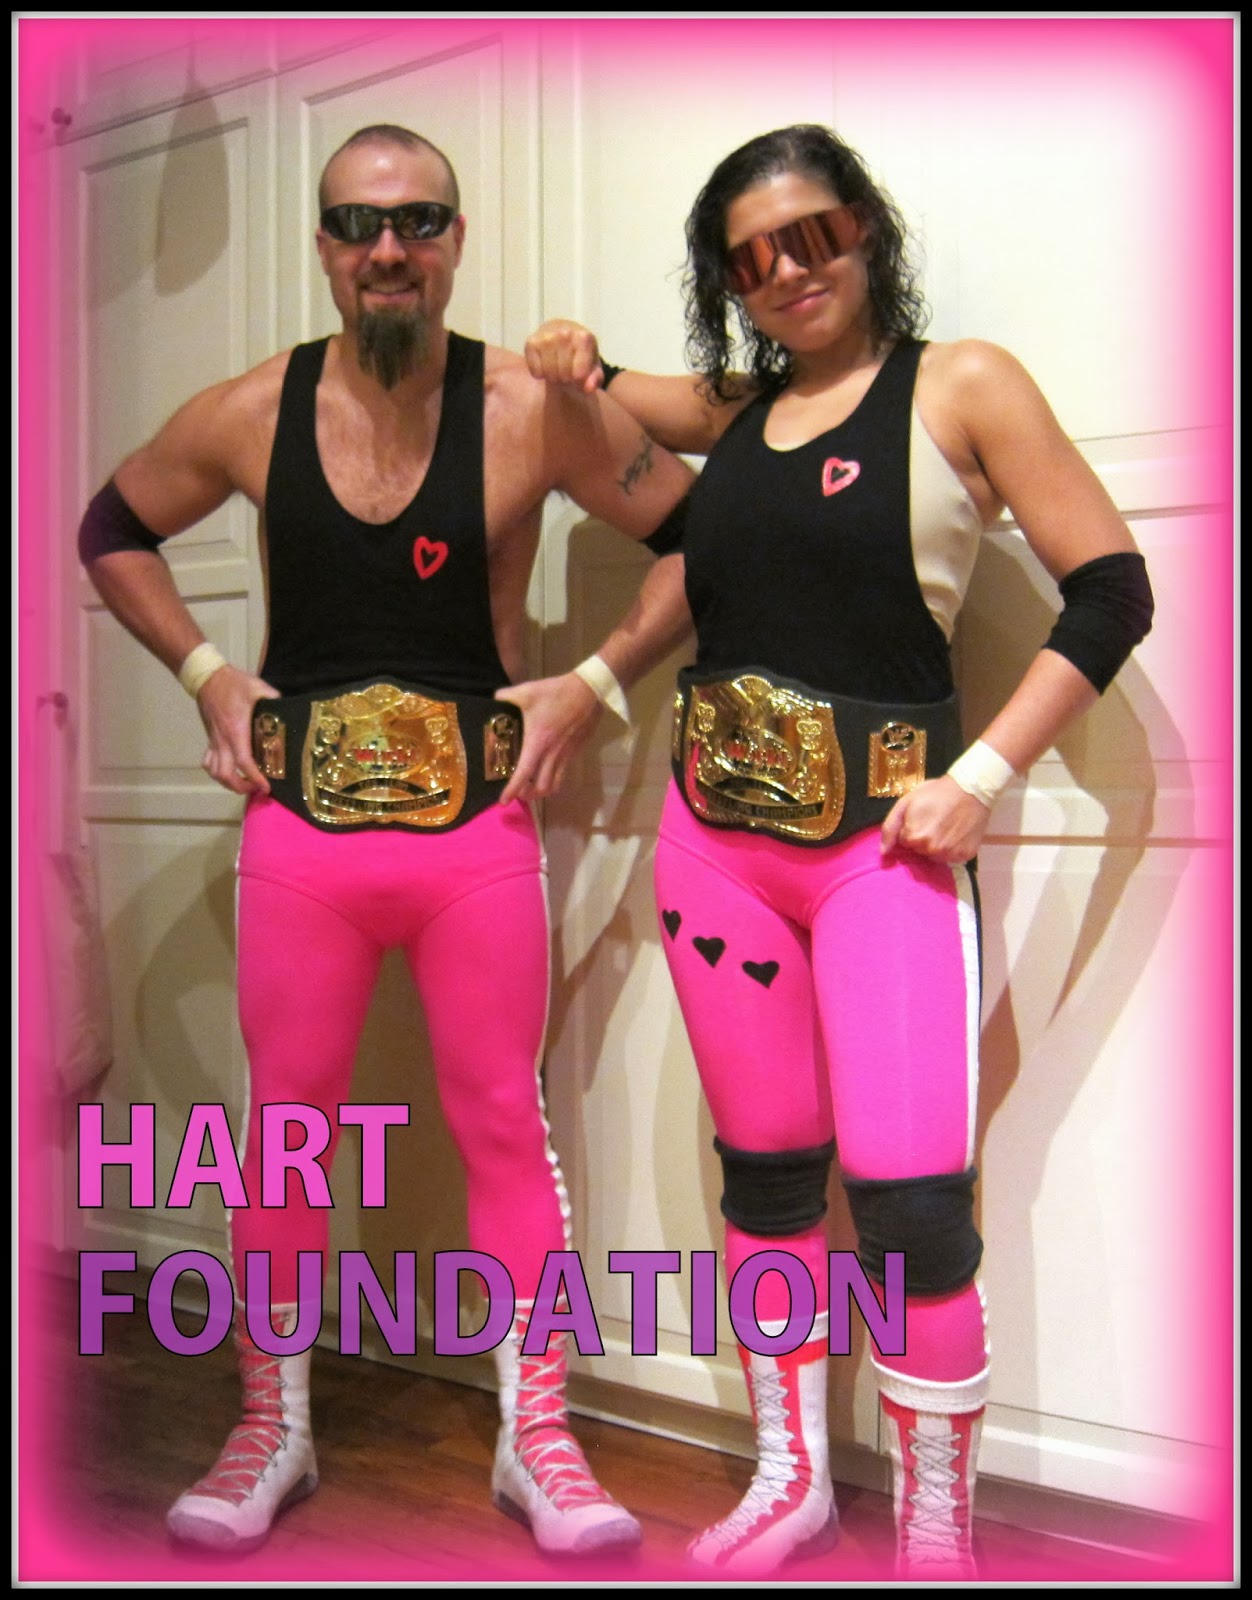 Bret Hart Signed Silver Throwback Hitman Wrap Around Glasses